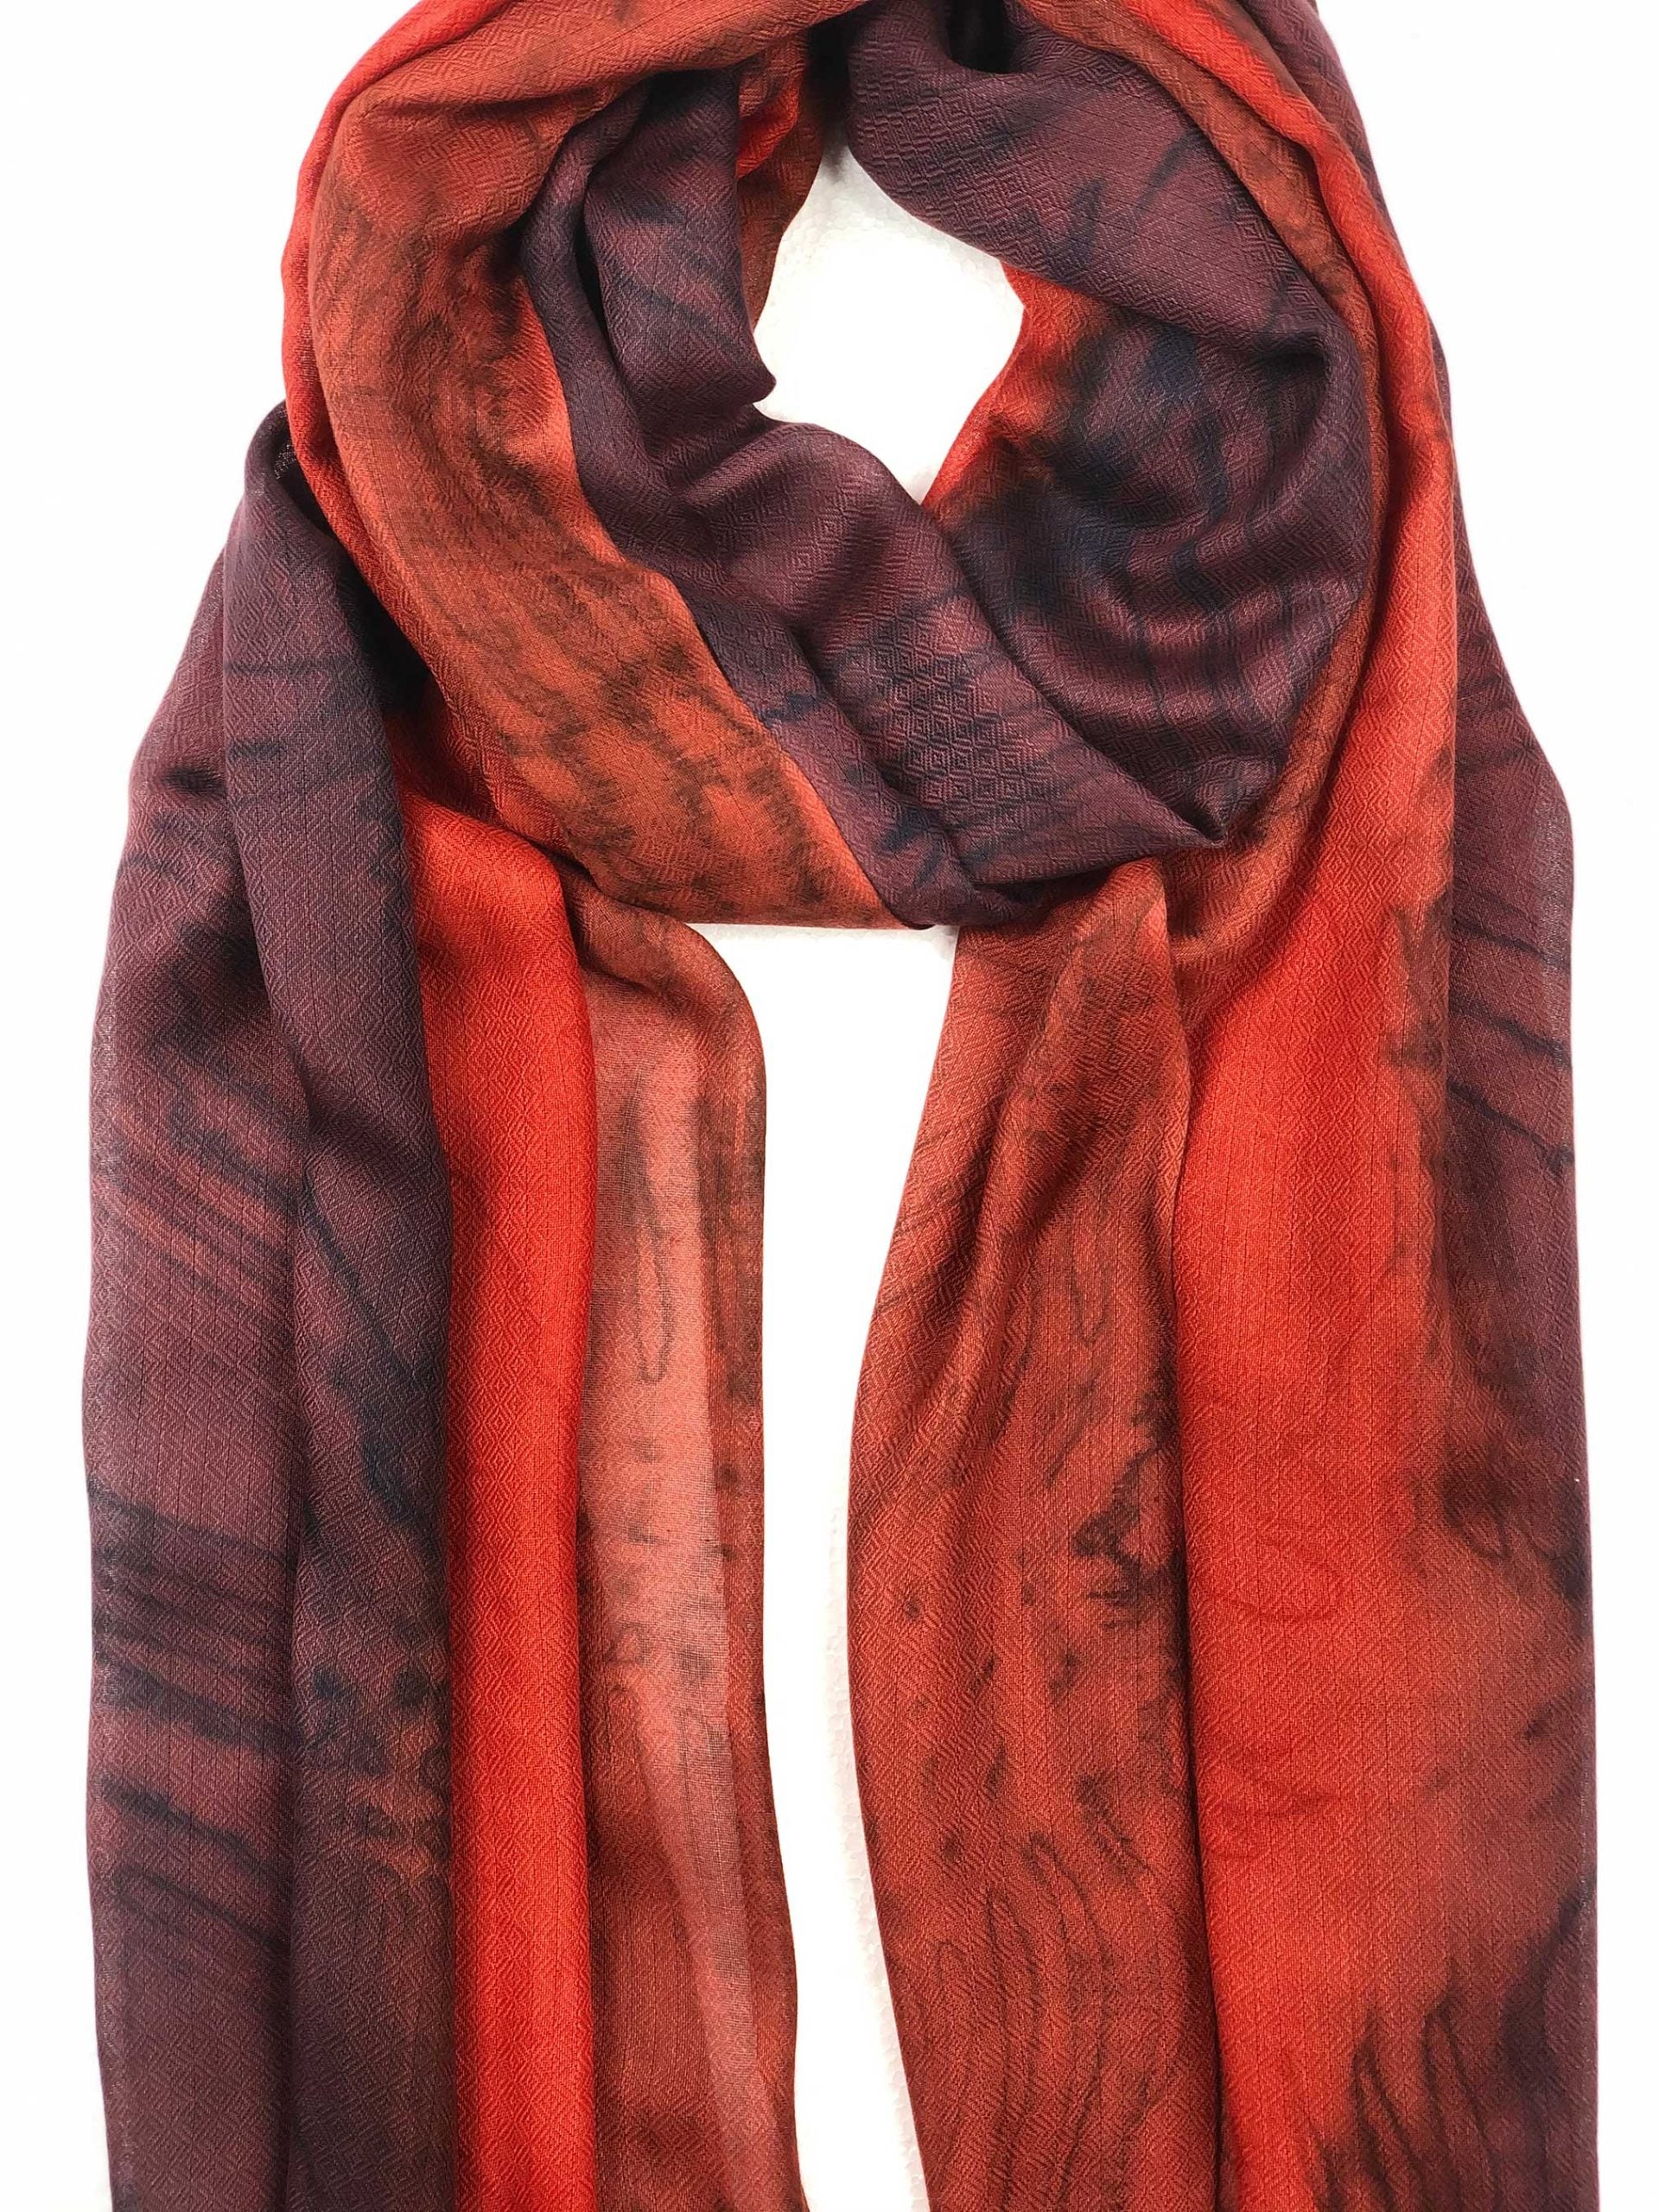 Burgundy Modal Silk Hand Painted Watercolor Scarf - Scarvesnthangs